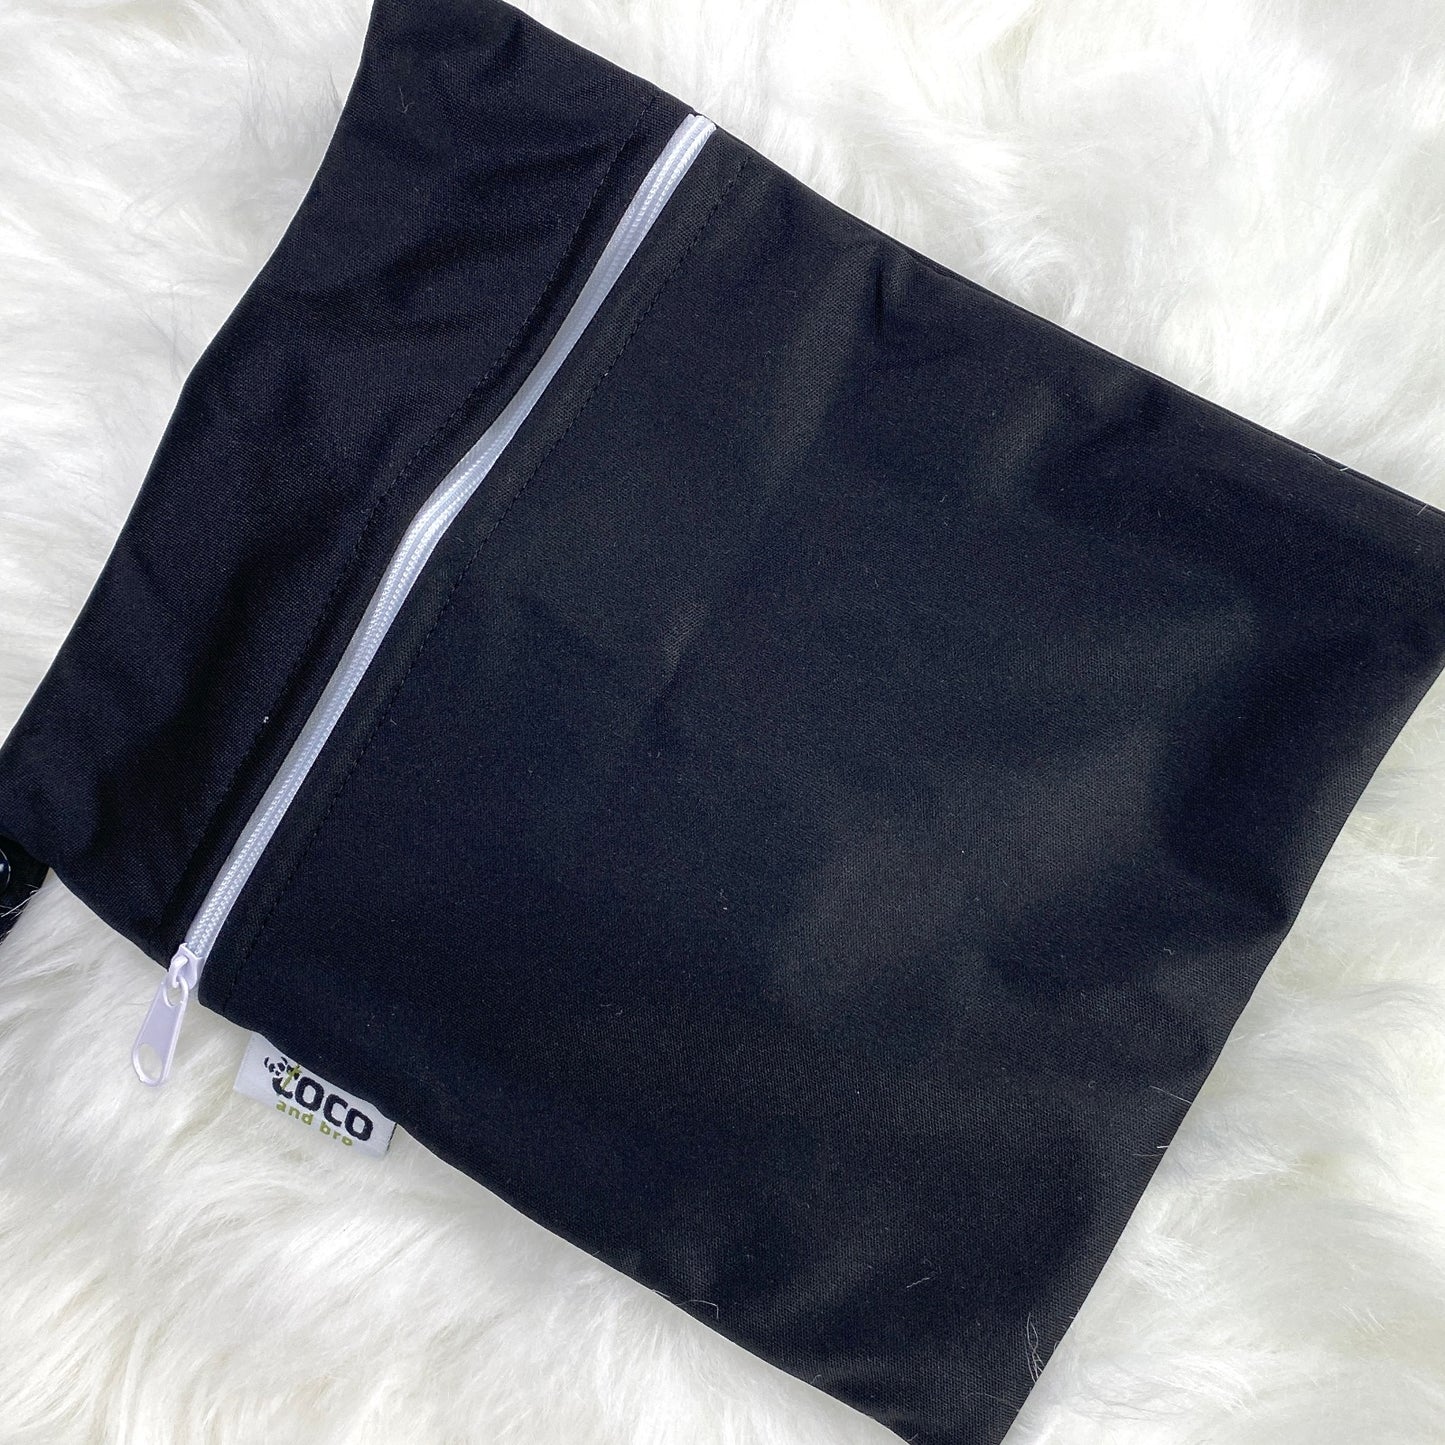 Each backpack purchase includes a free waterproof bag. This image shows the waterproof bag in black, with a zip closure.